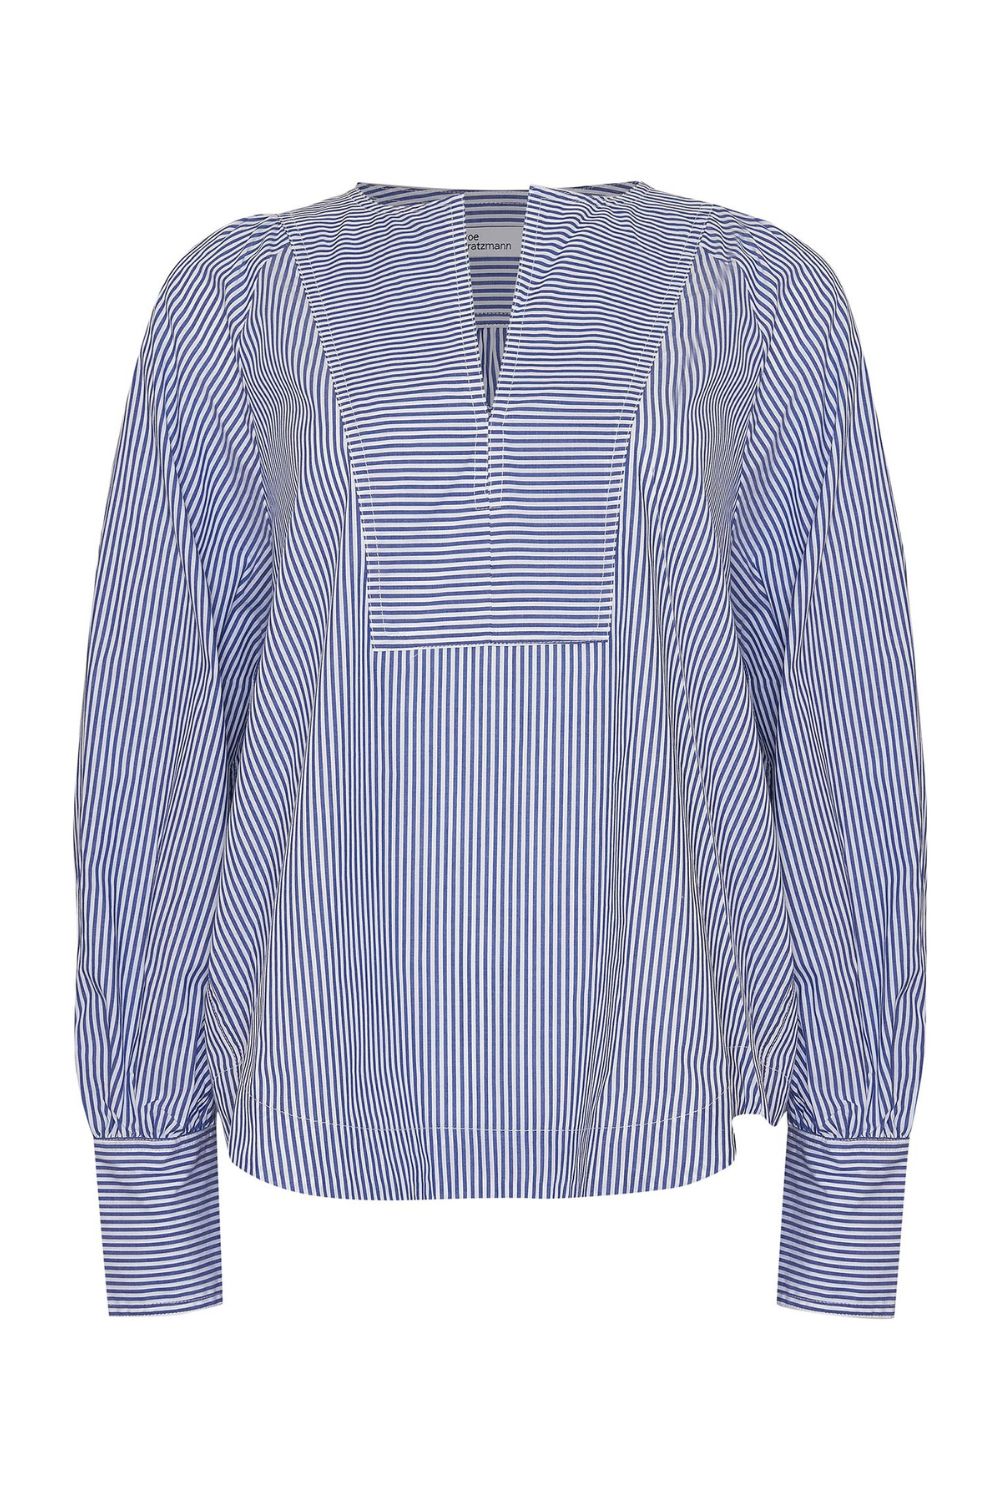 collude top - navy stripe